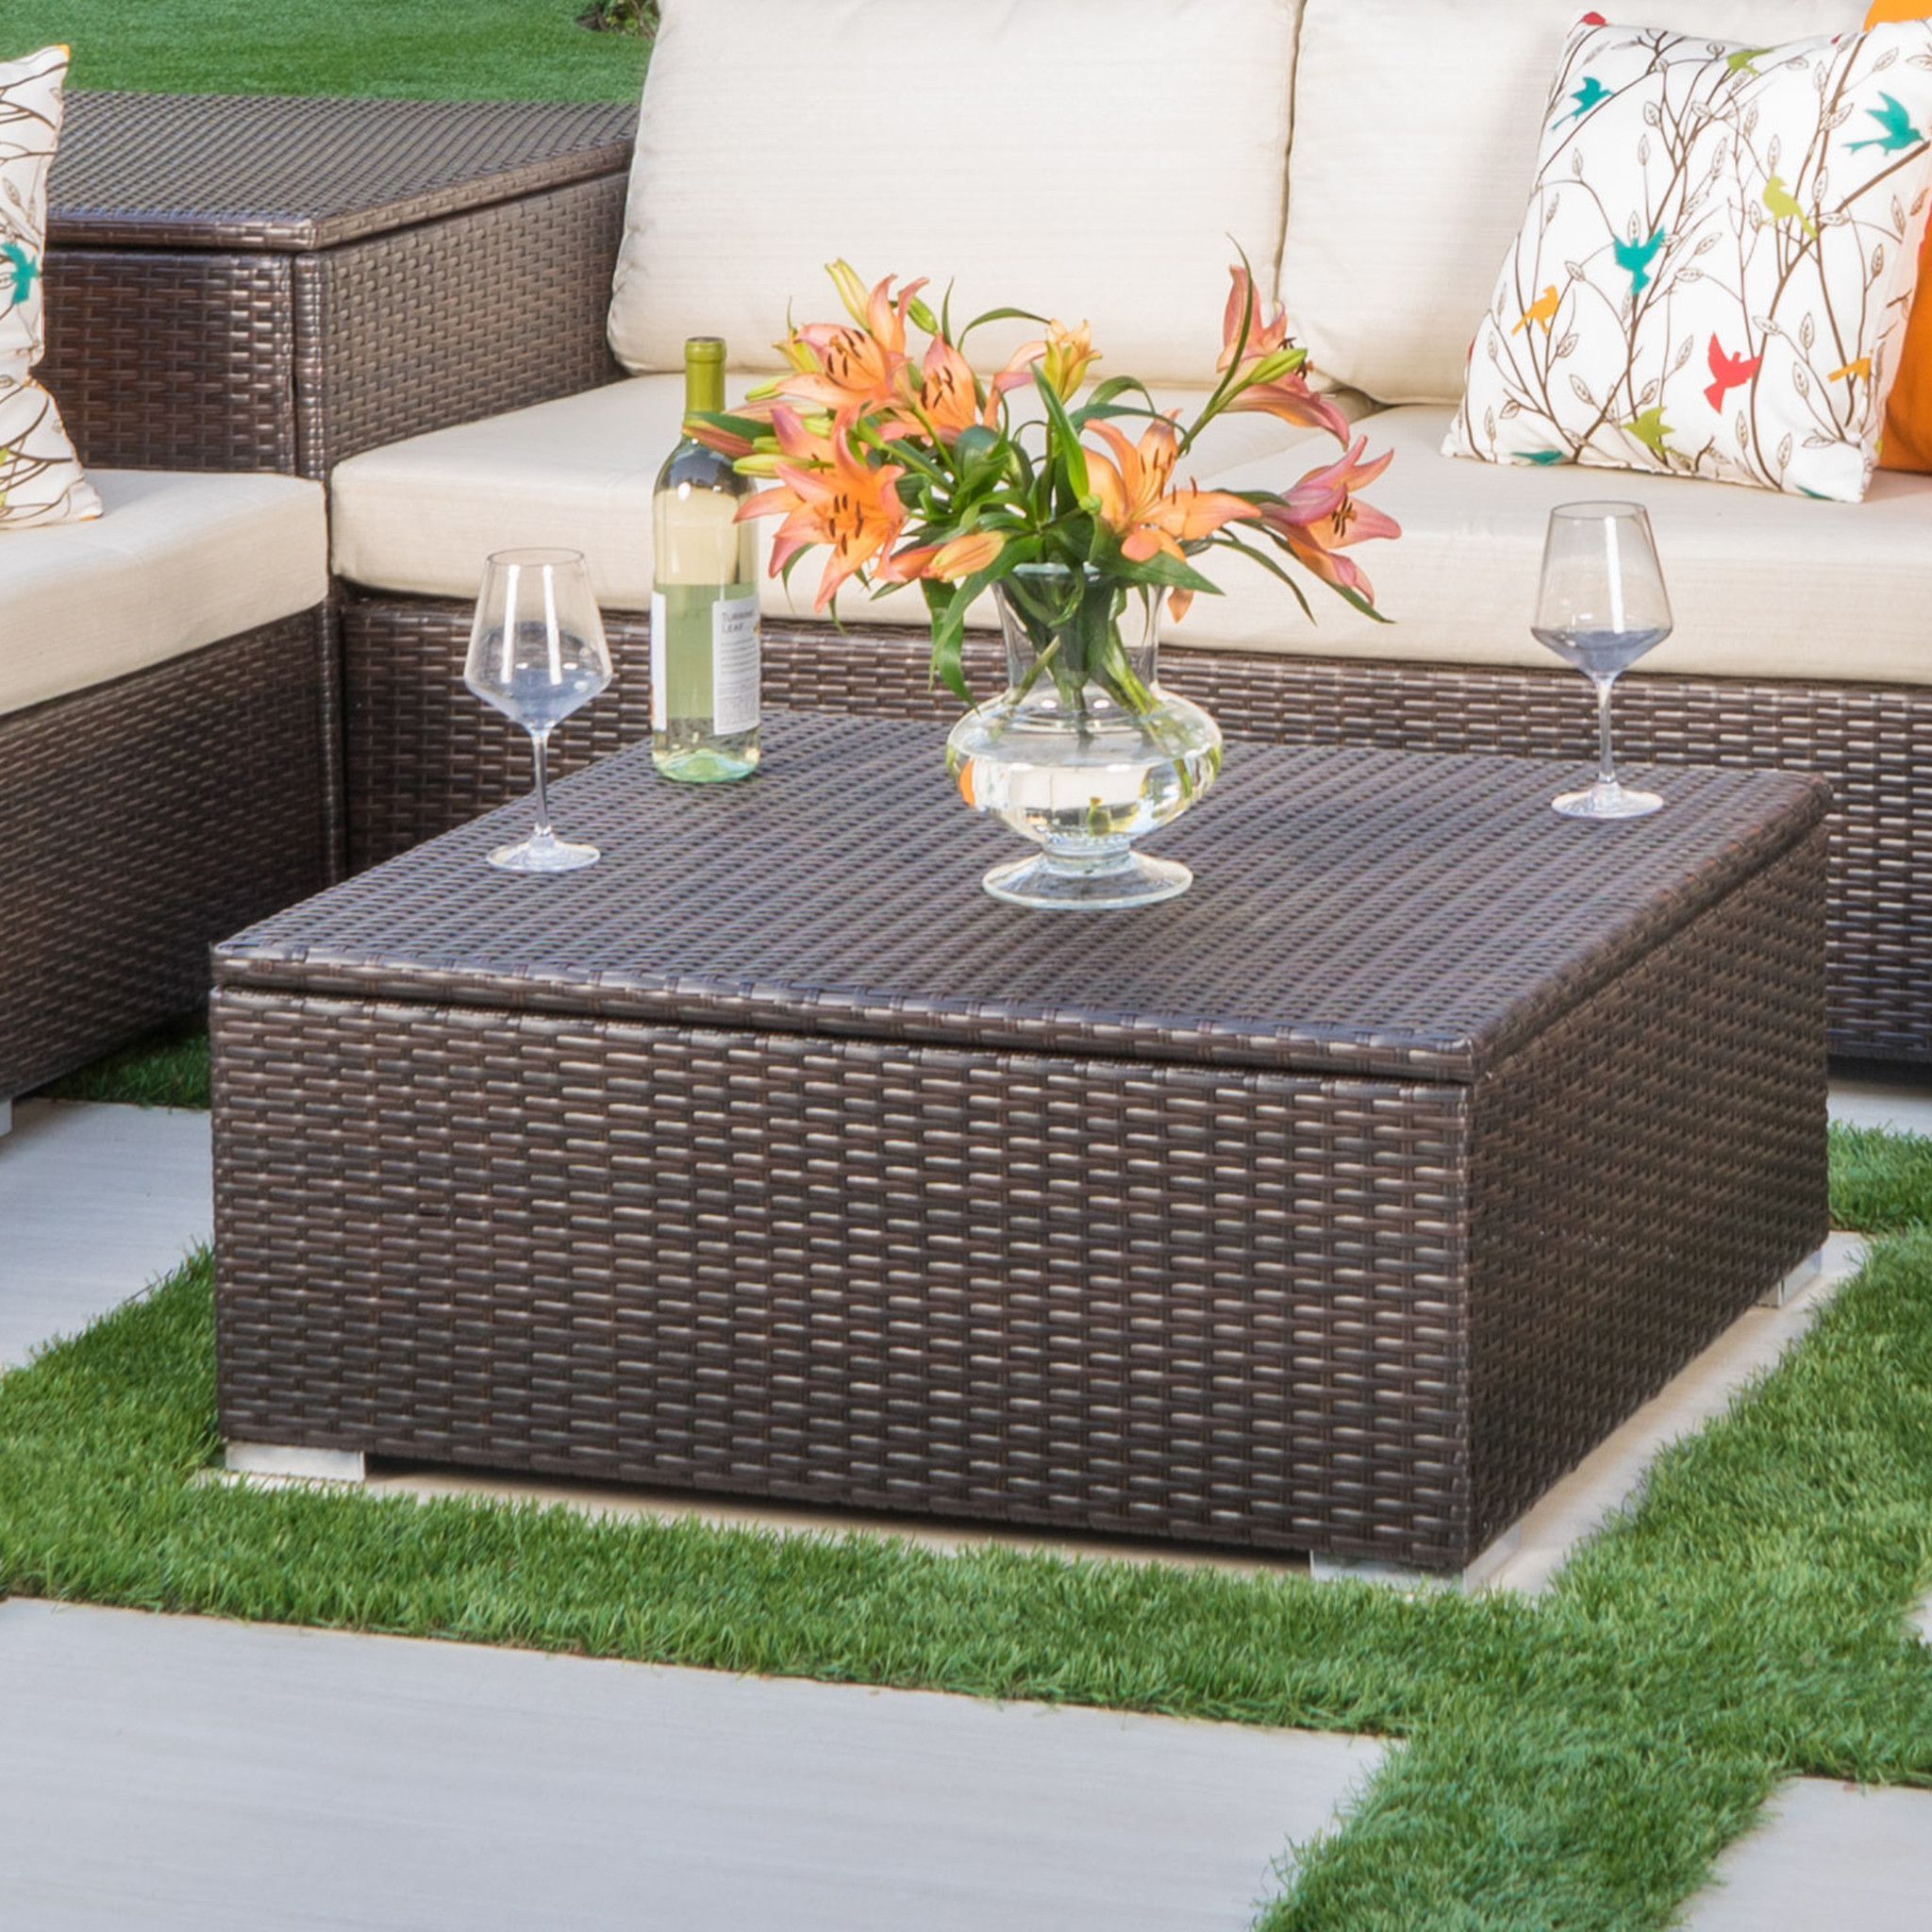 San Louis Obispo Outdoor Wicker Storage Coffee Table Coffee Table Cover Pertaining To Waterproof Coffee Tables (View 6 of 21)